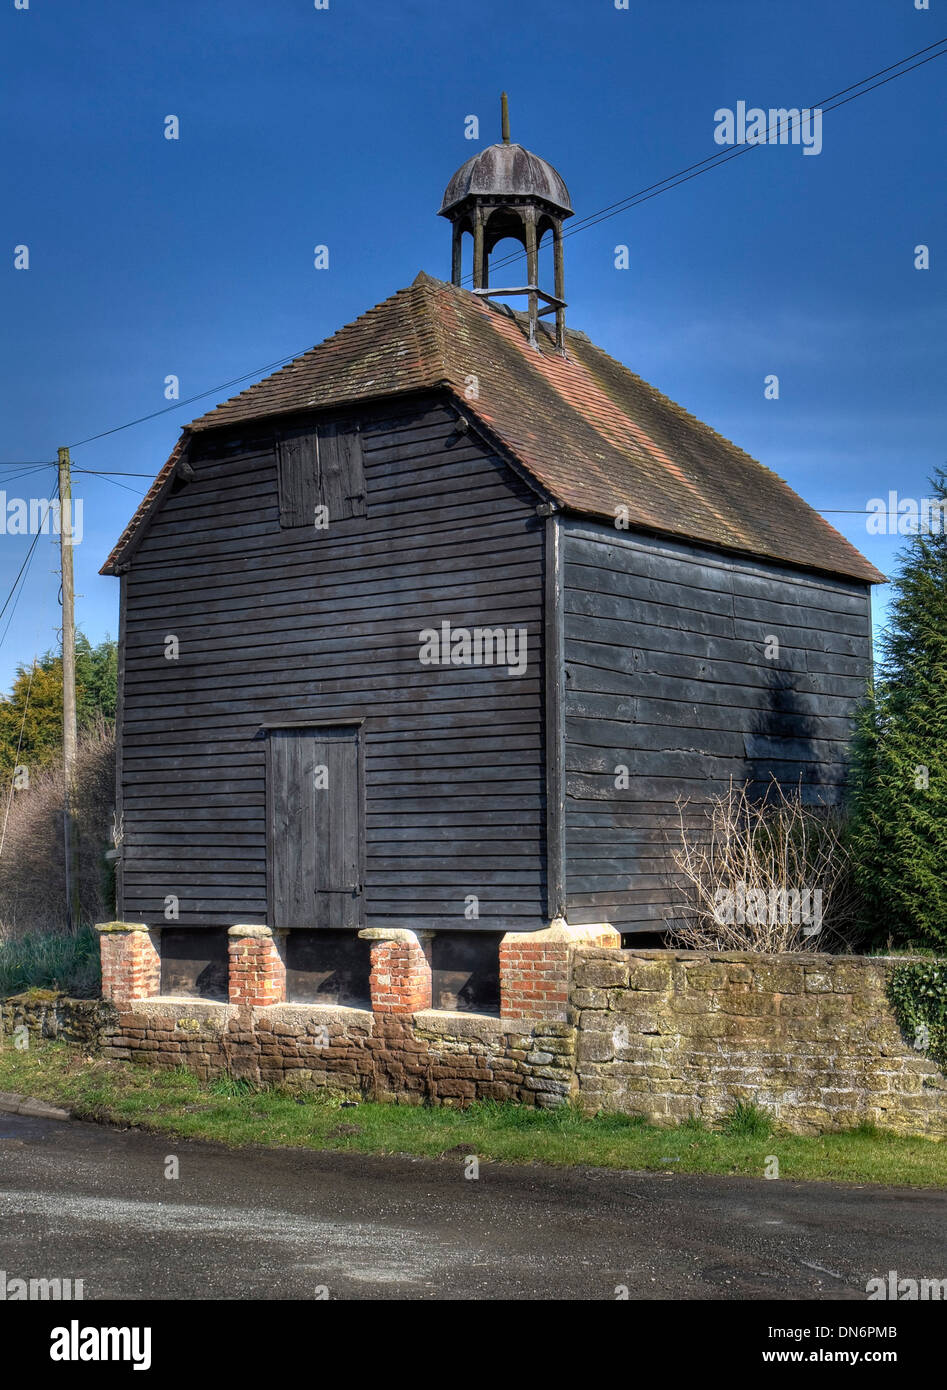 Traditional granary with cupola, Herefordshire, England. Stock Photo